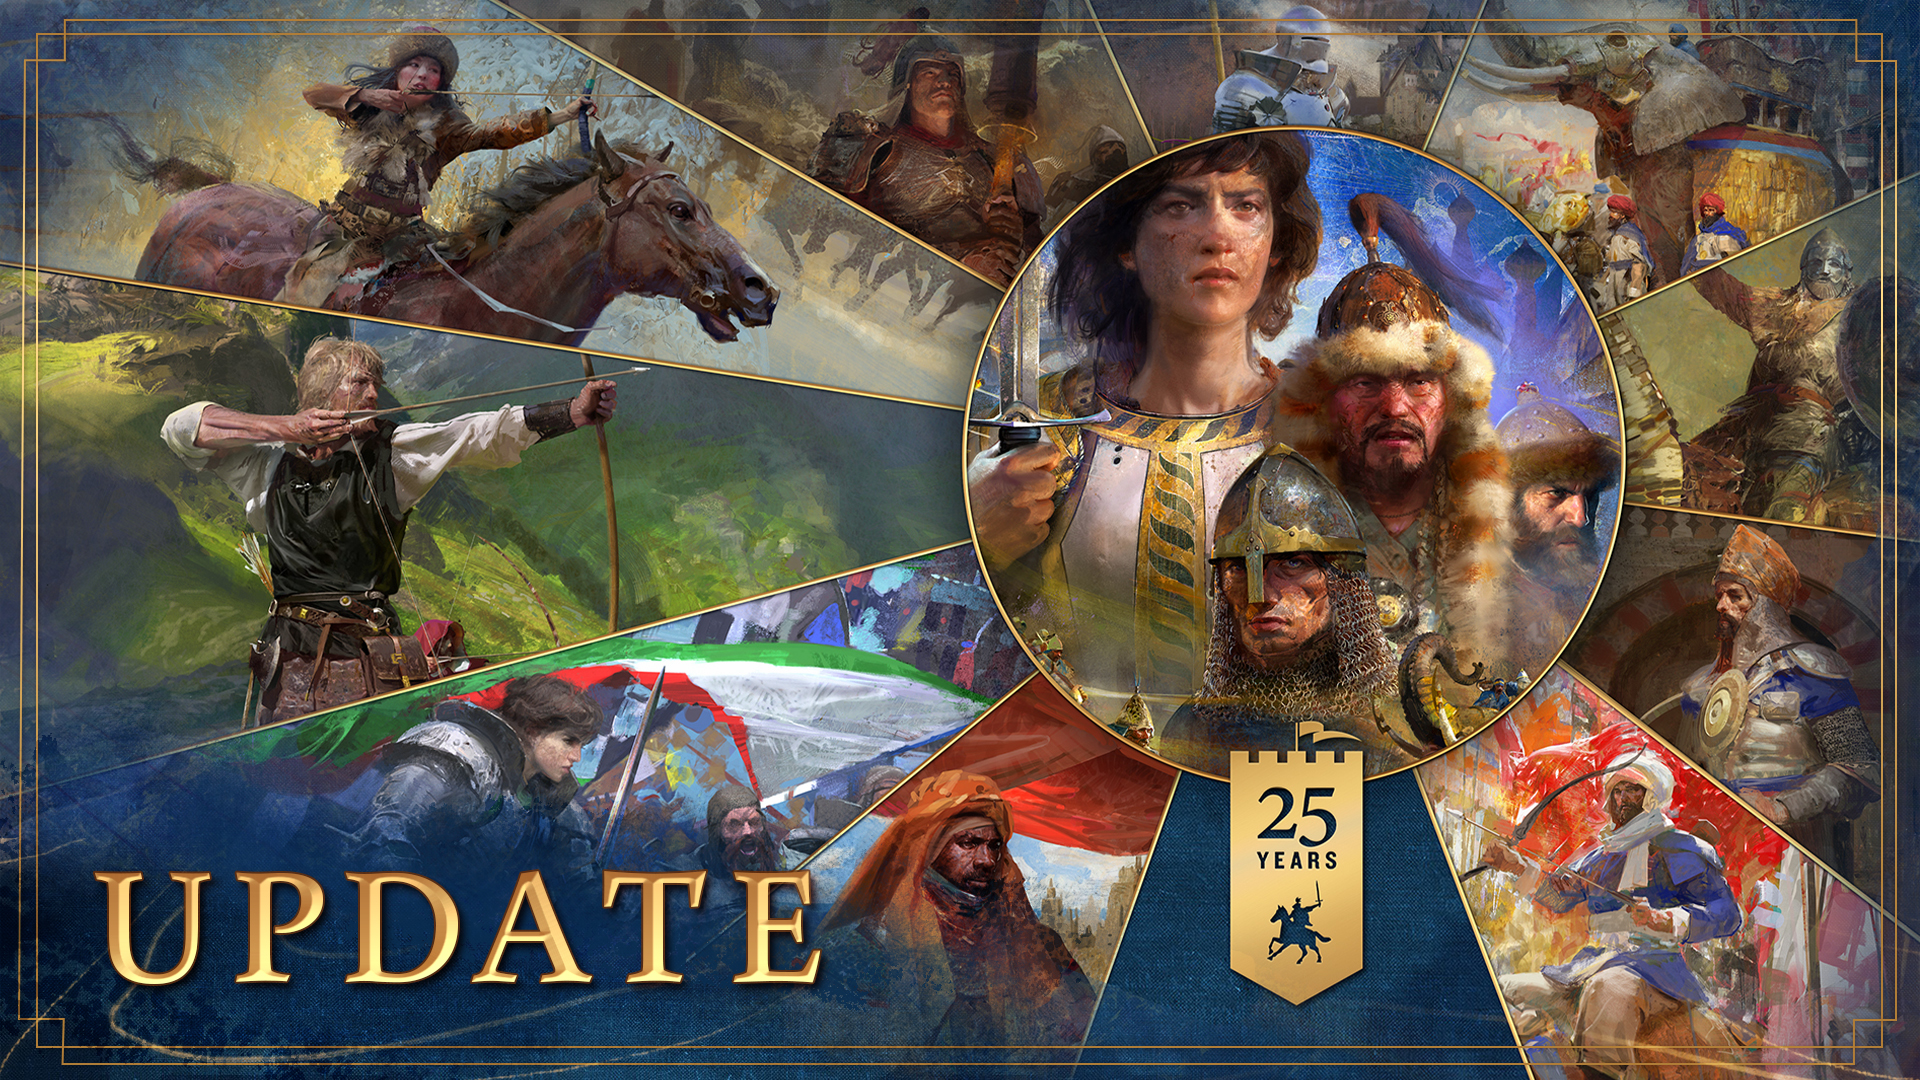 The tech tree preview uses an inconsistent mix of unit icons and unit  upgrade icons to represent available units - II - Report a Bug - Age of  Empires Forum